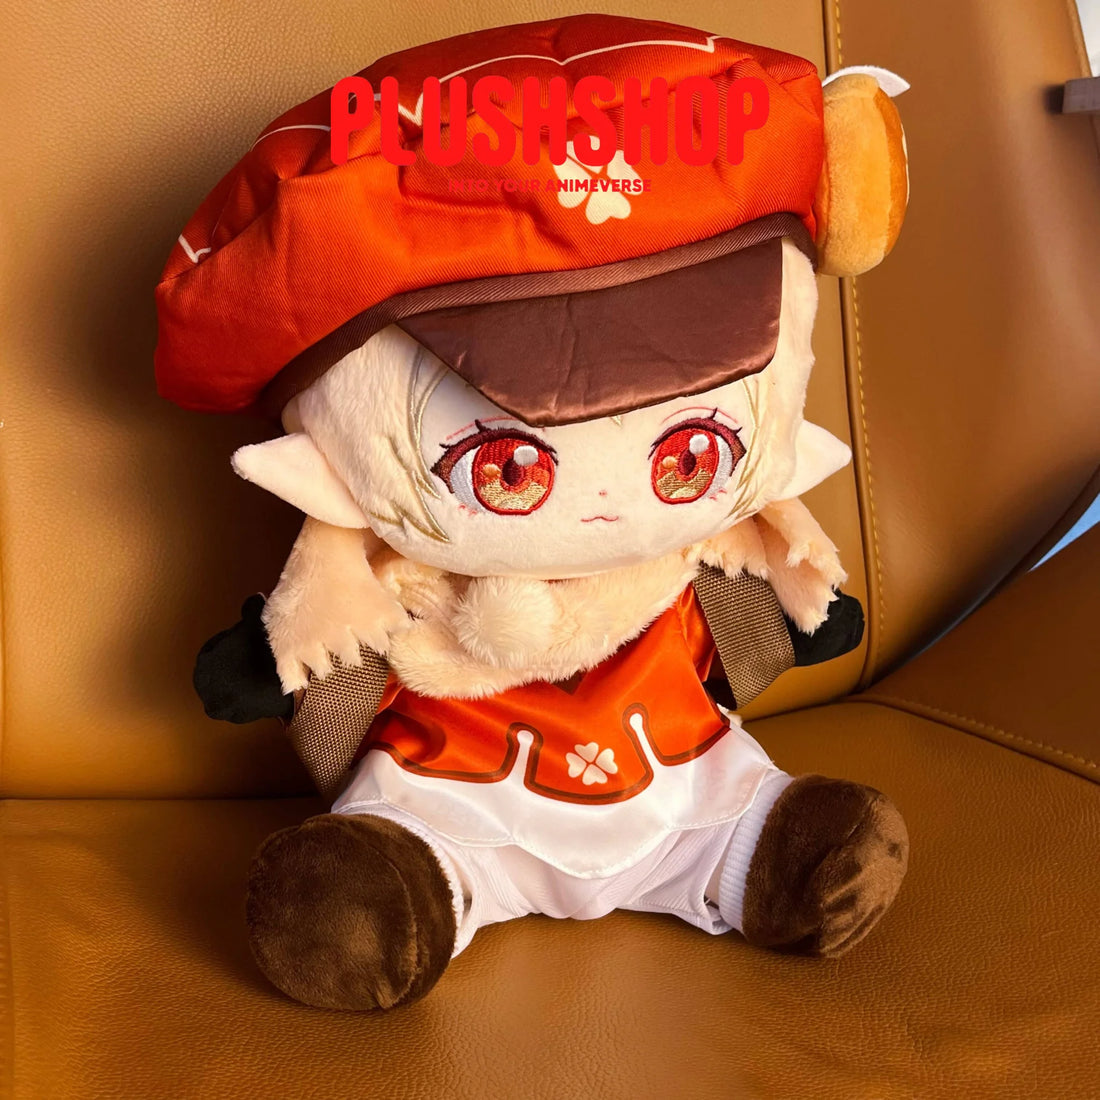 30Cm Genshin Klee Plush With Outfit And Bag Cute Doll With Bones Outfit